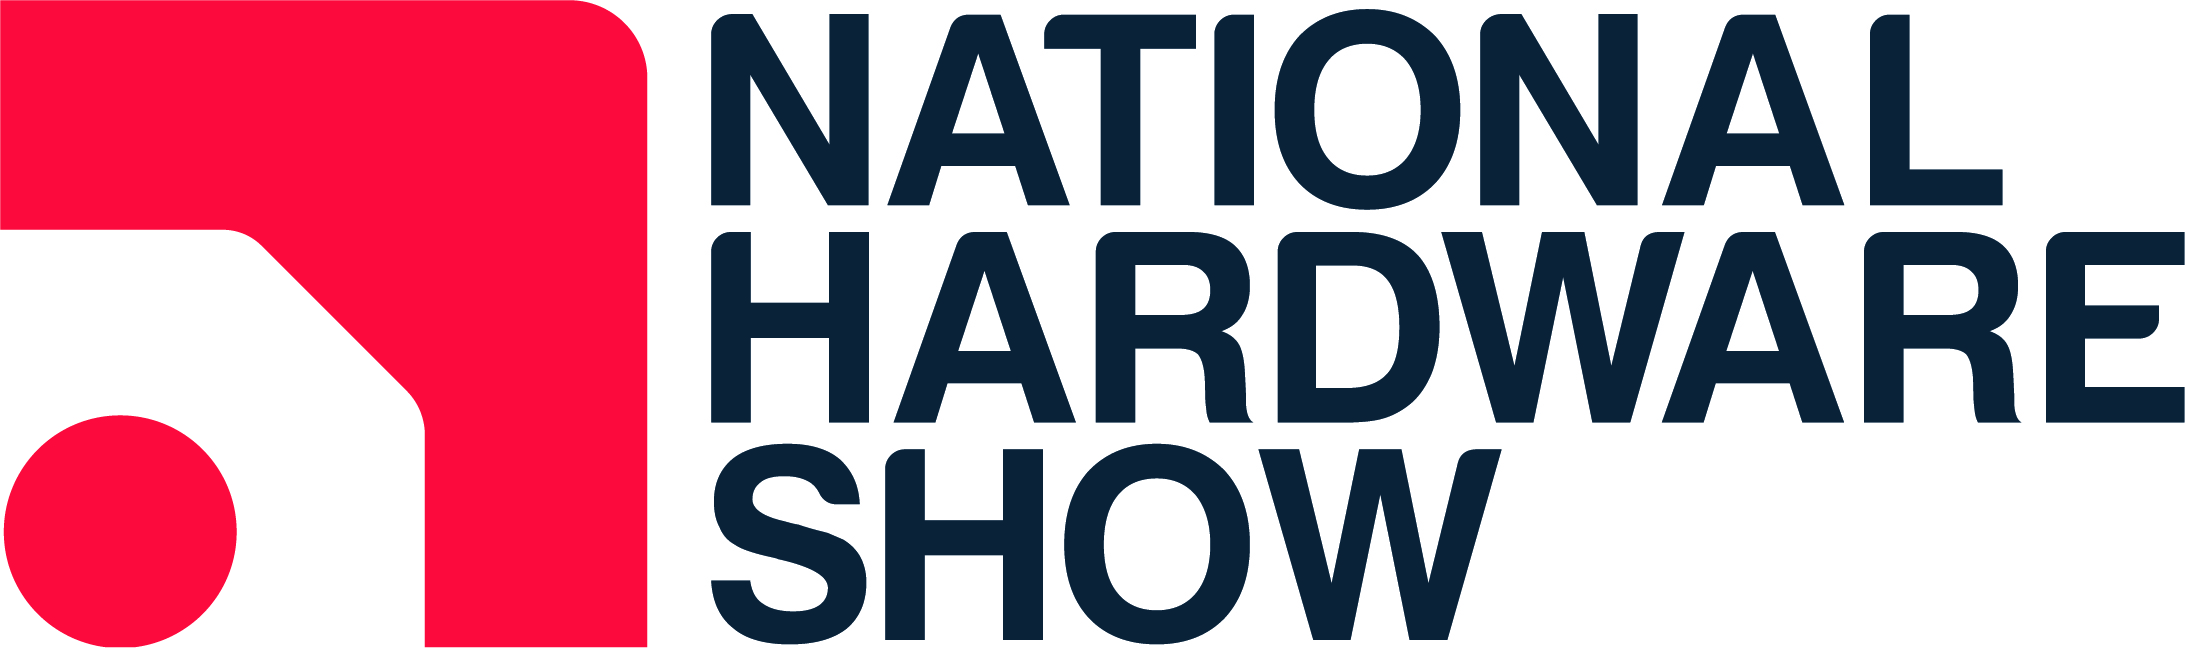 NATIONAL HARDWARE SHOW WELCOMES PACIFIC EMBLEM COMPANY TO THE MAY 2019 SHOW IN VEGAS!